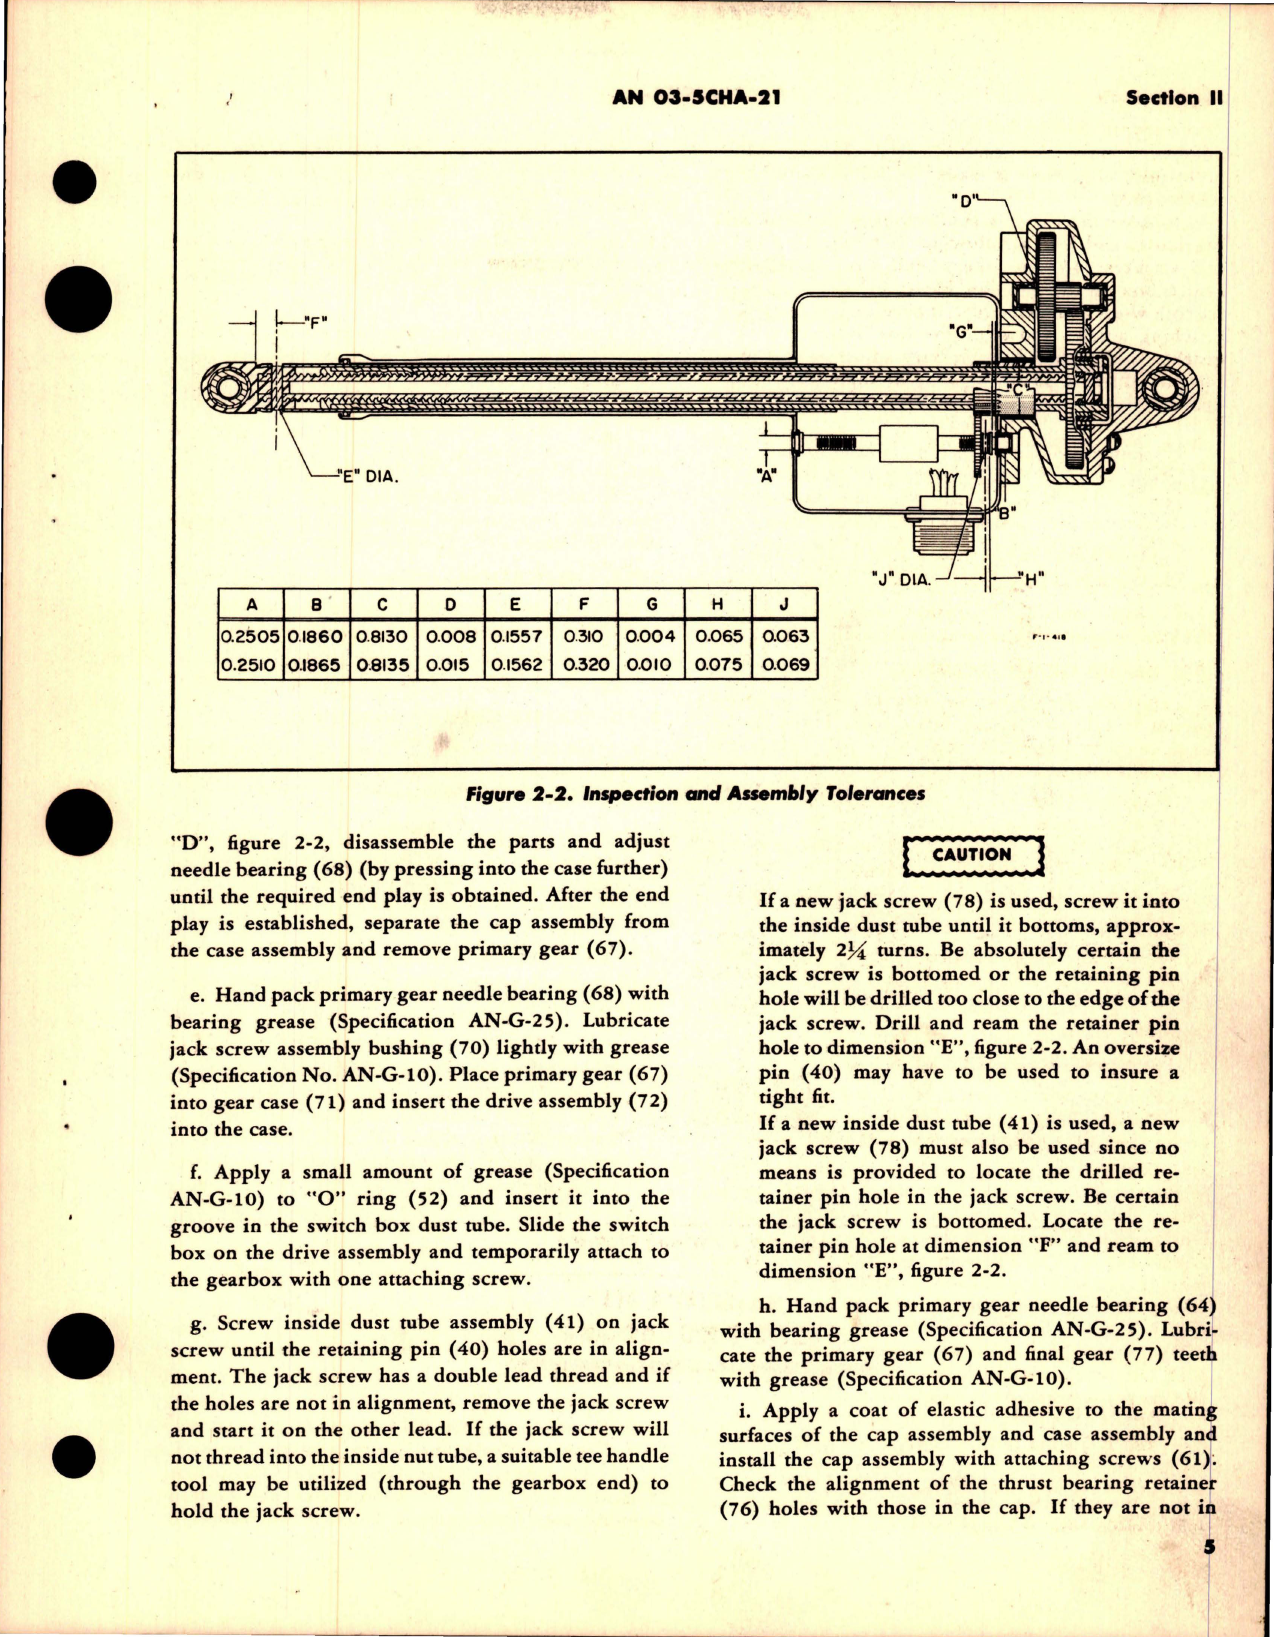 Sample page 7 from AirCorps Library document: Overhaul Instructions for Electromechanical Linear Actuators - Part 30582 and 31534 